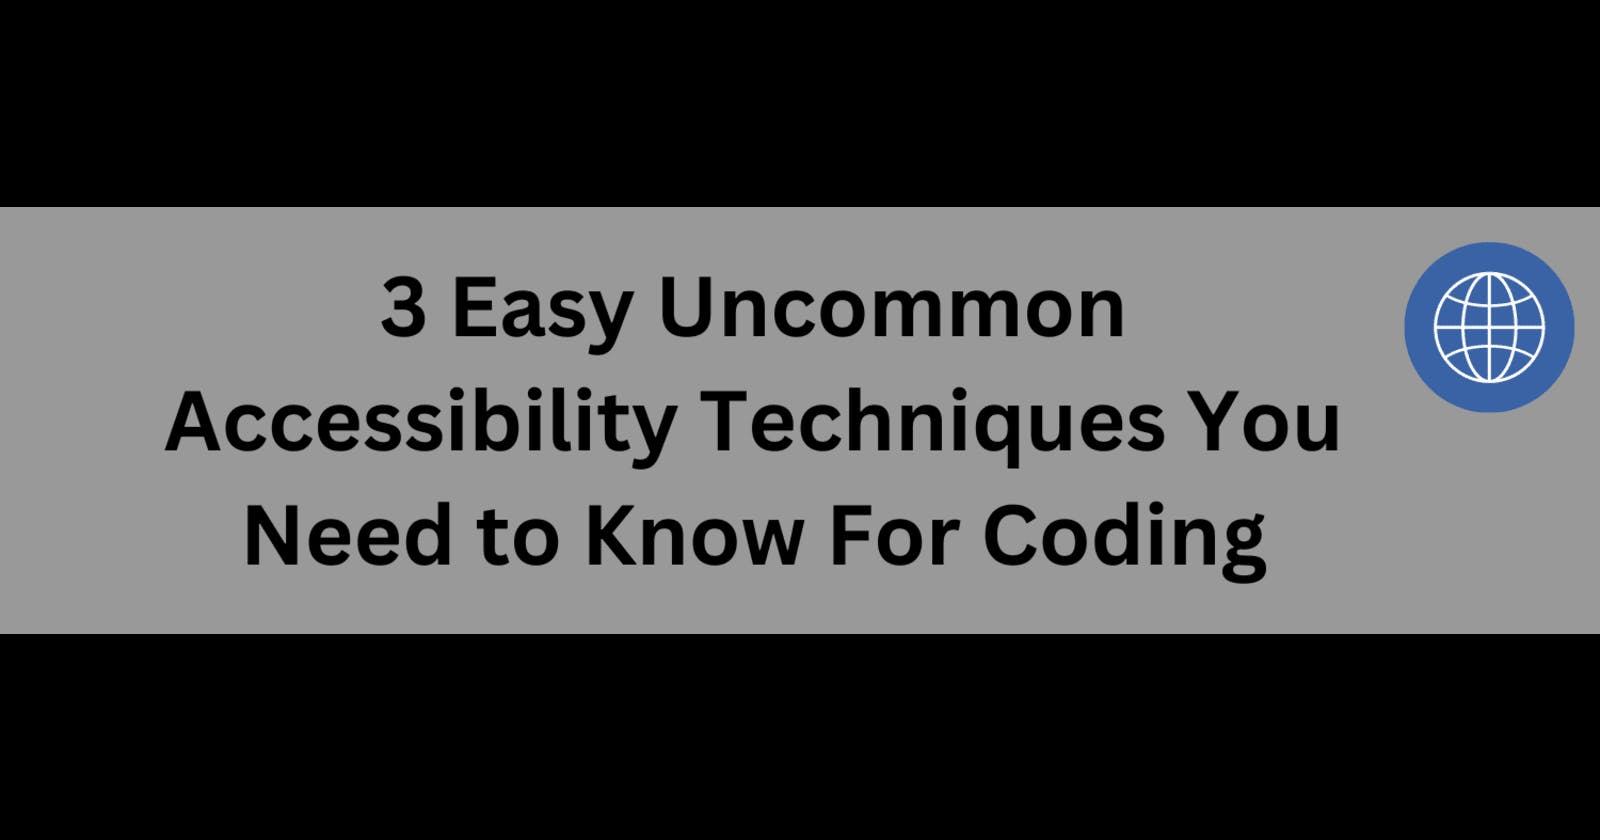 3 Easy Uncommon Accessibility Techniques You Need to Know For Coding